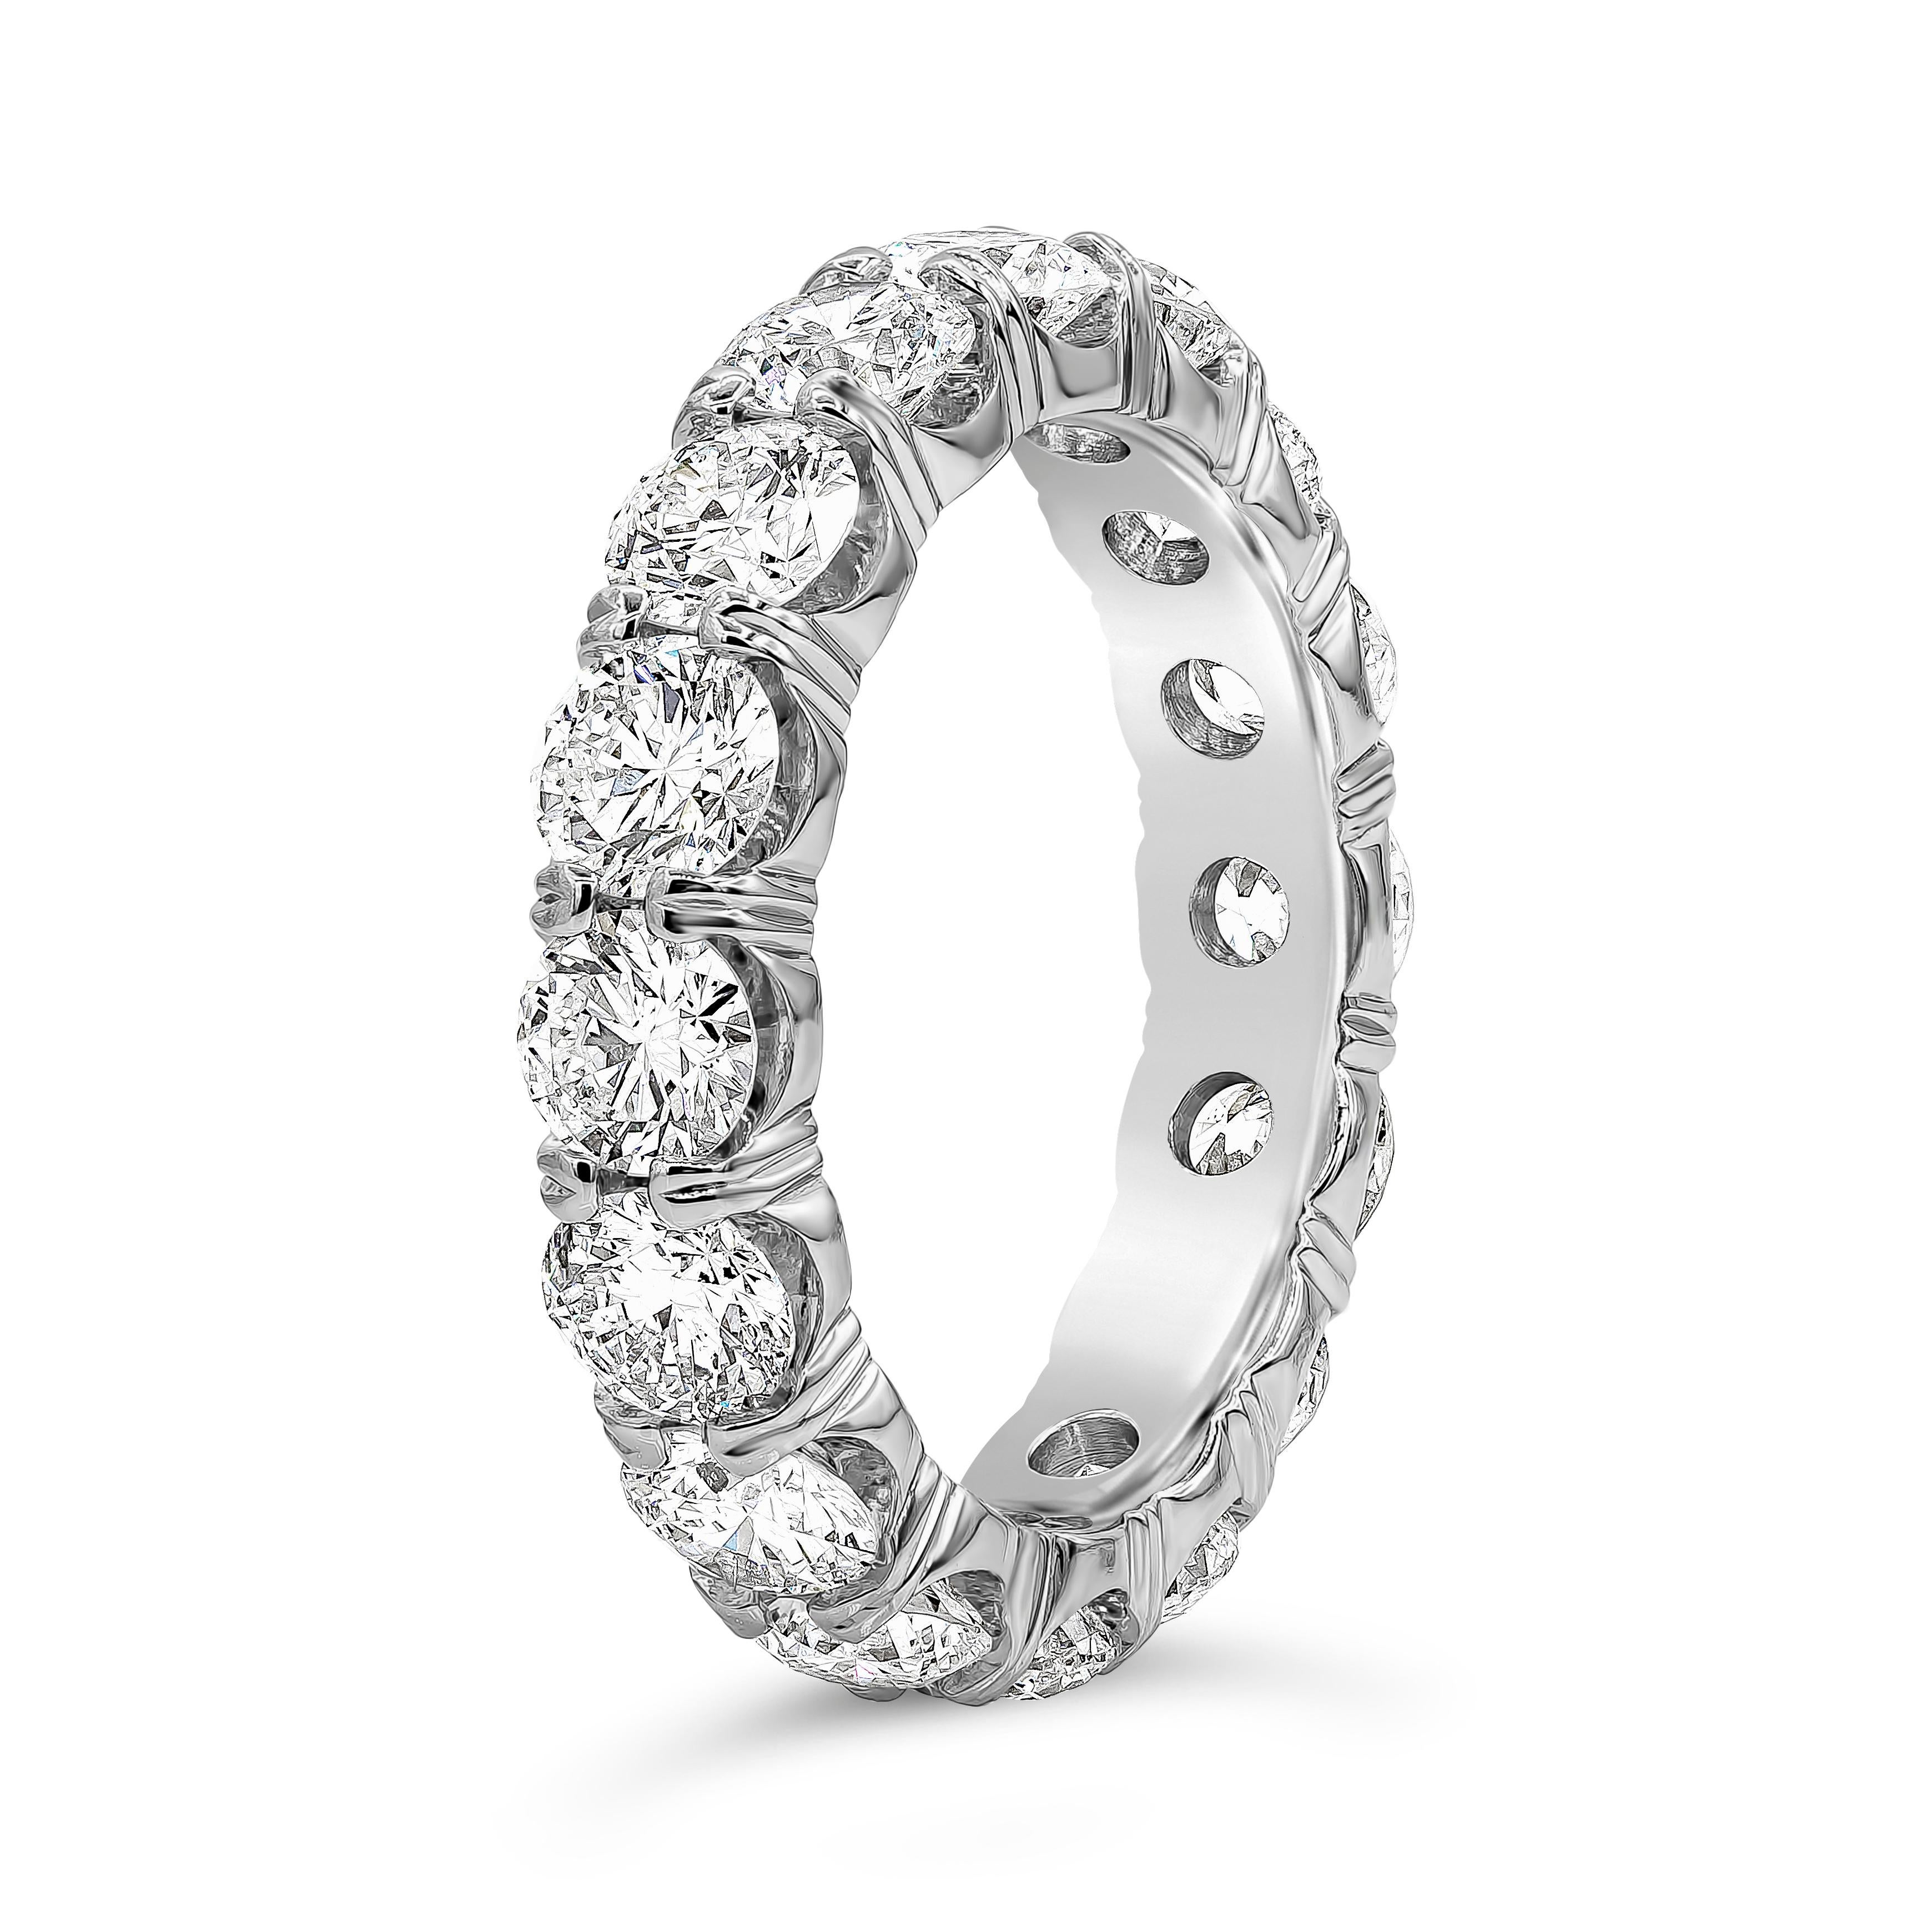 A classic and timeless eternity band style showcasing a row of round brilliant diamonds weighing 4.22 carats total, F Color and SI2- I1 in Clarity. Set in a shared-prong, Made with Platinum. Size 6.5 US

Style available in different price ranges.